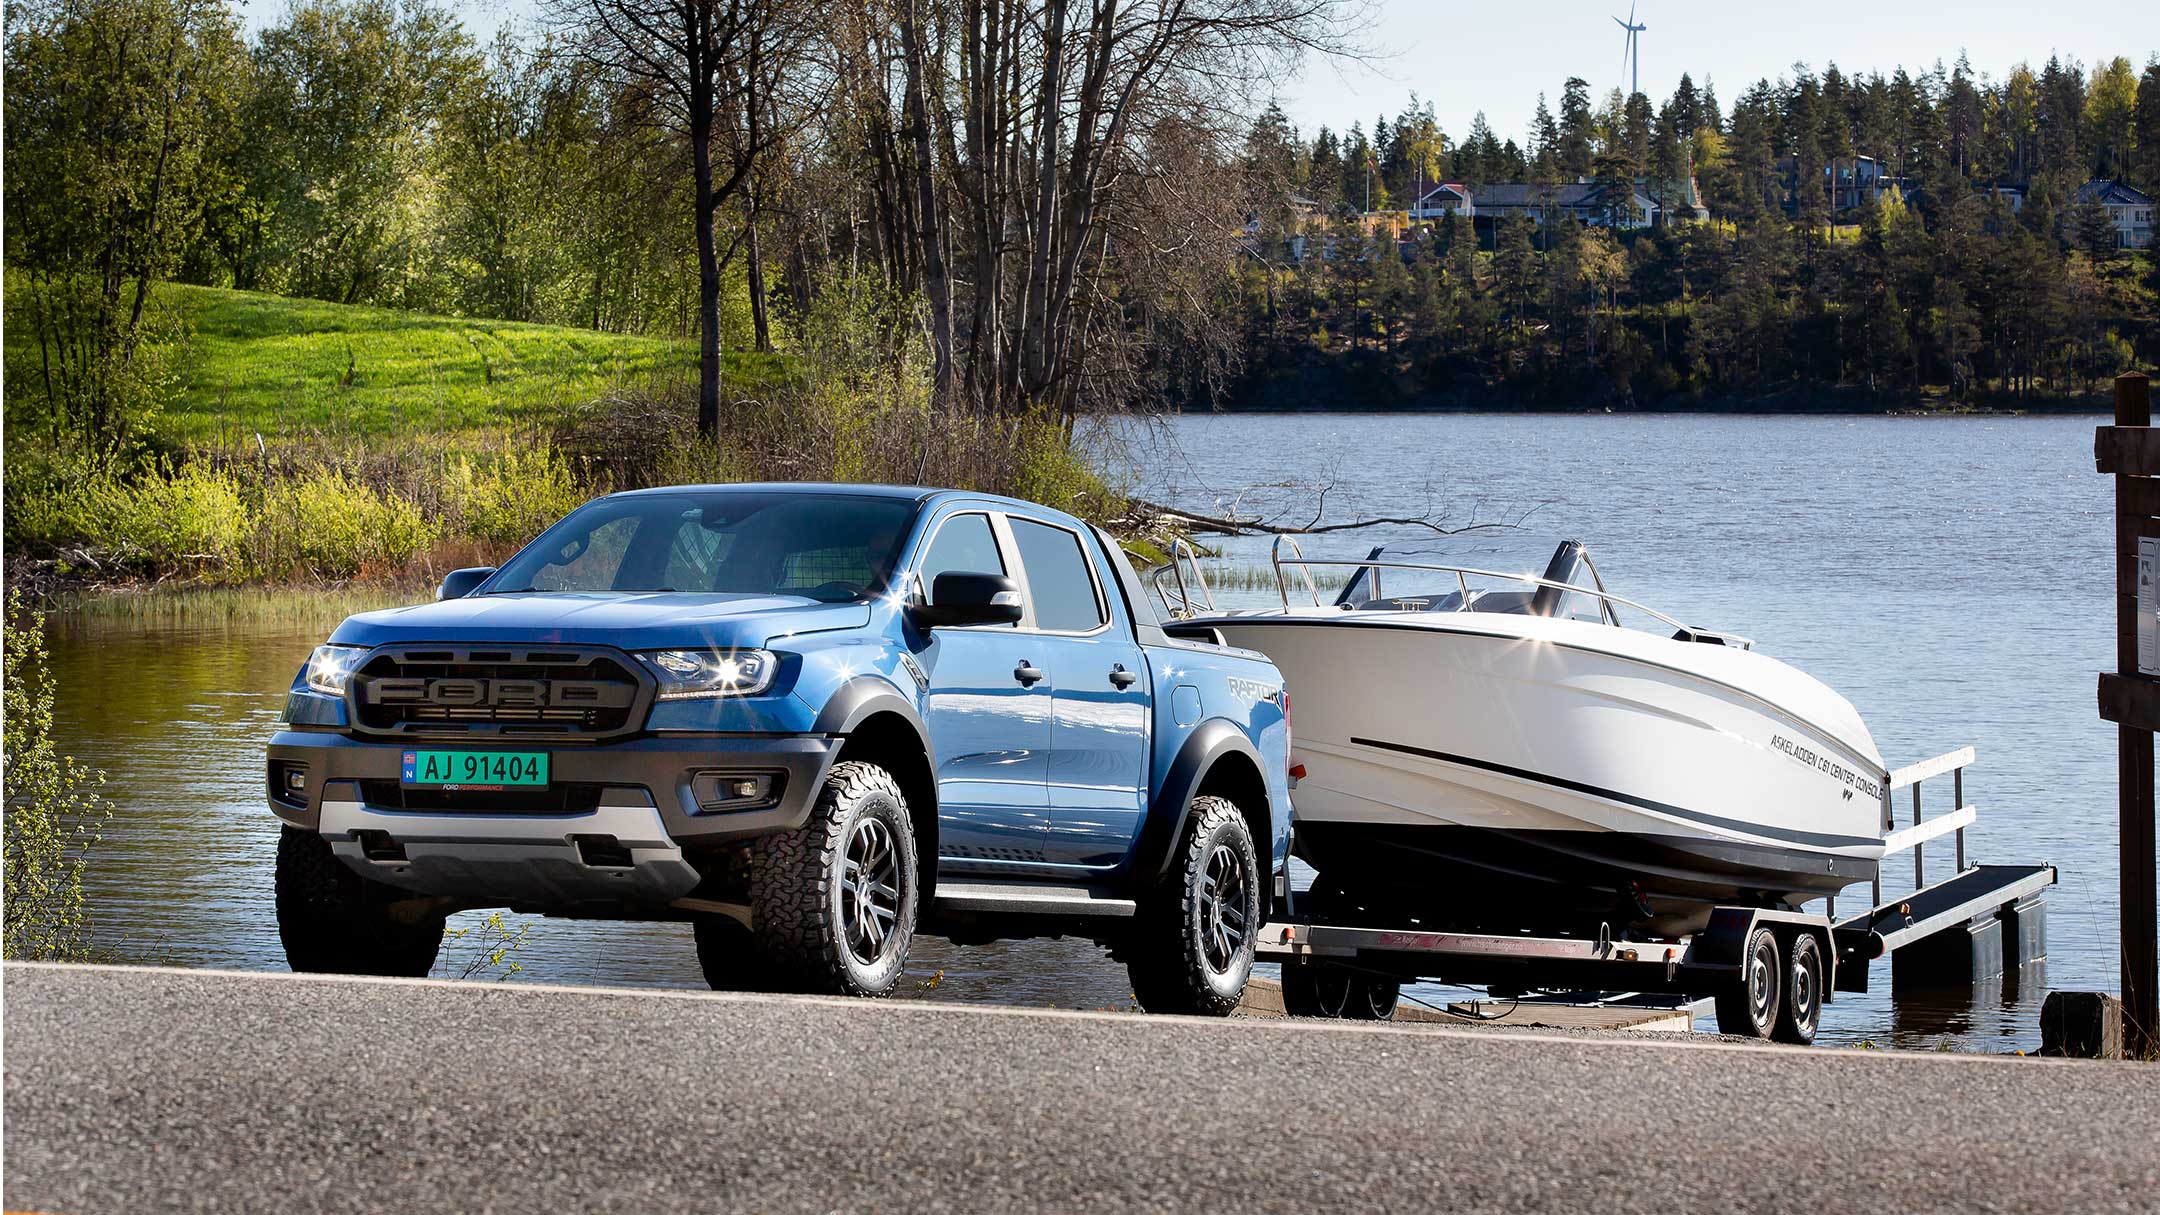 Ford Ranger Raptor towing a boat